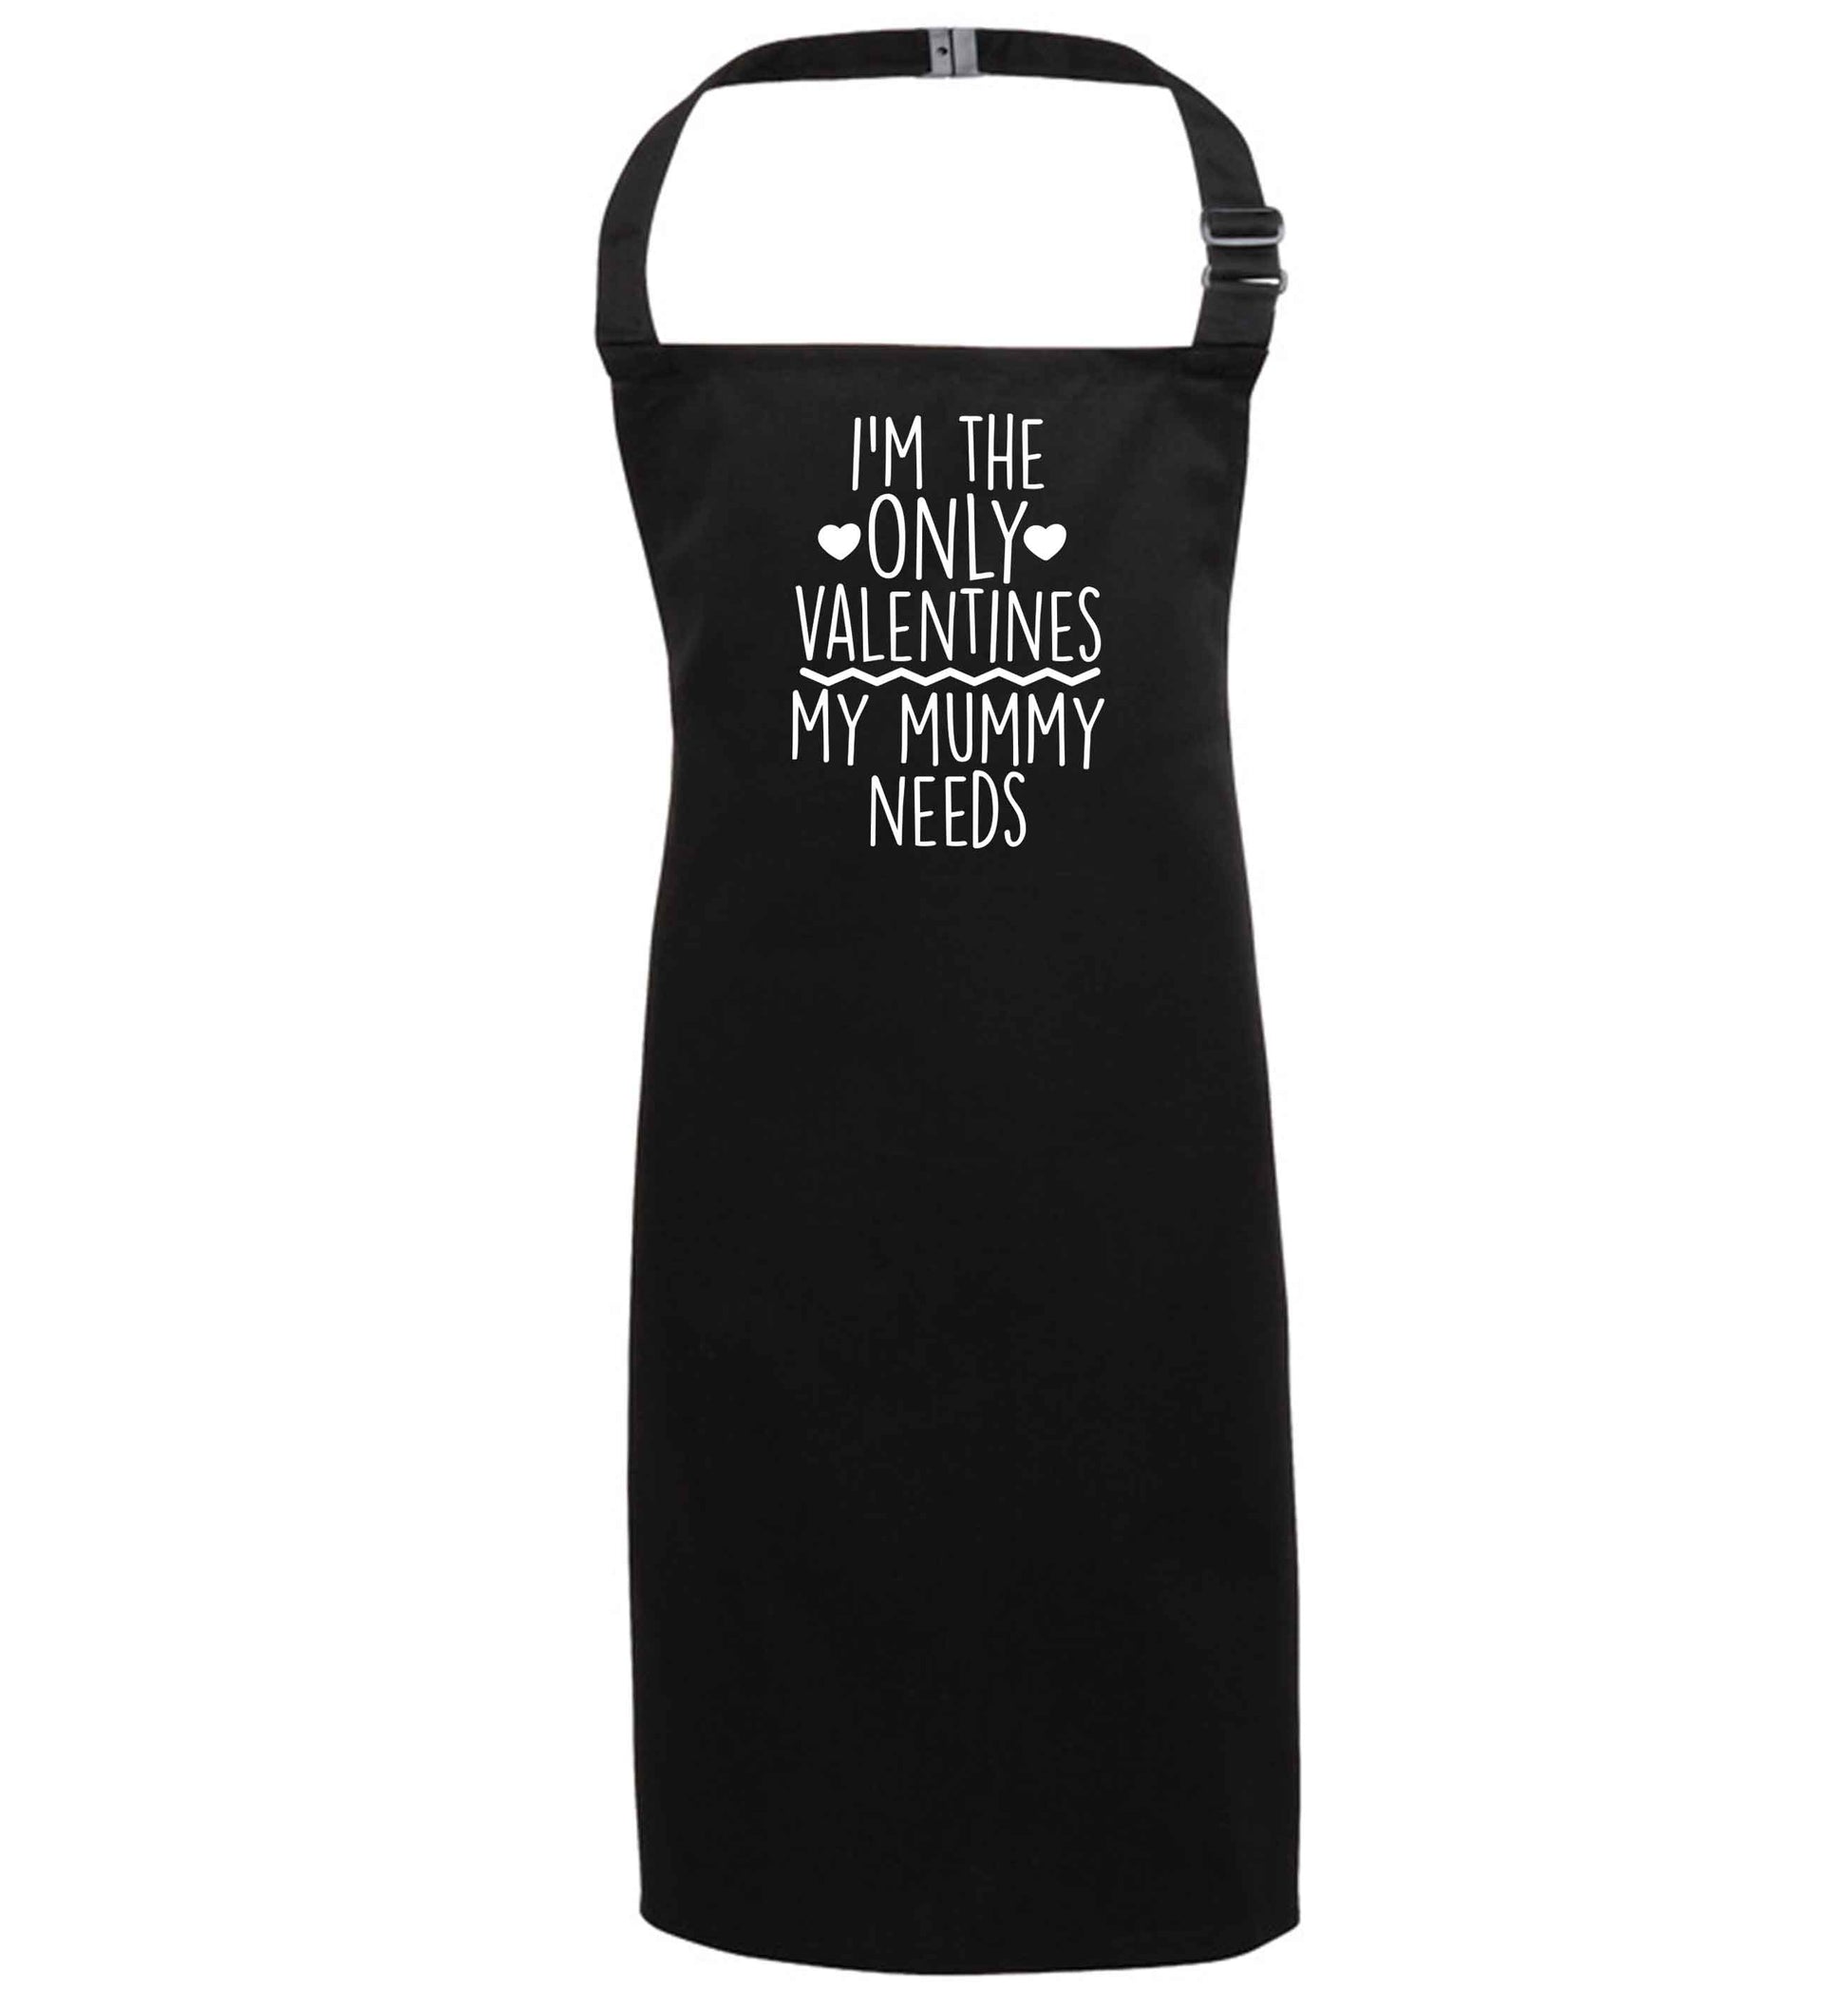 I'm the only valentines my mummy needs black apron 7-10 years